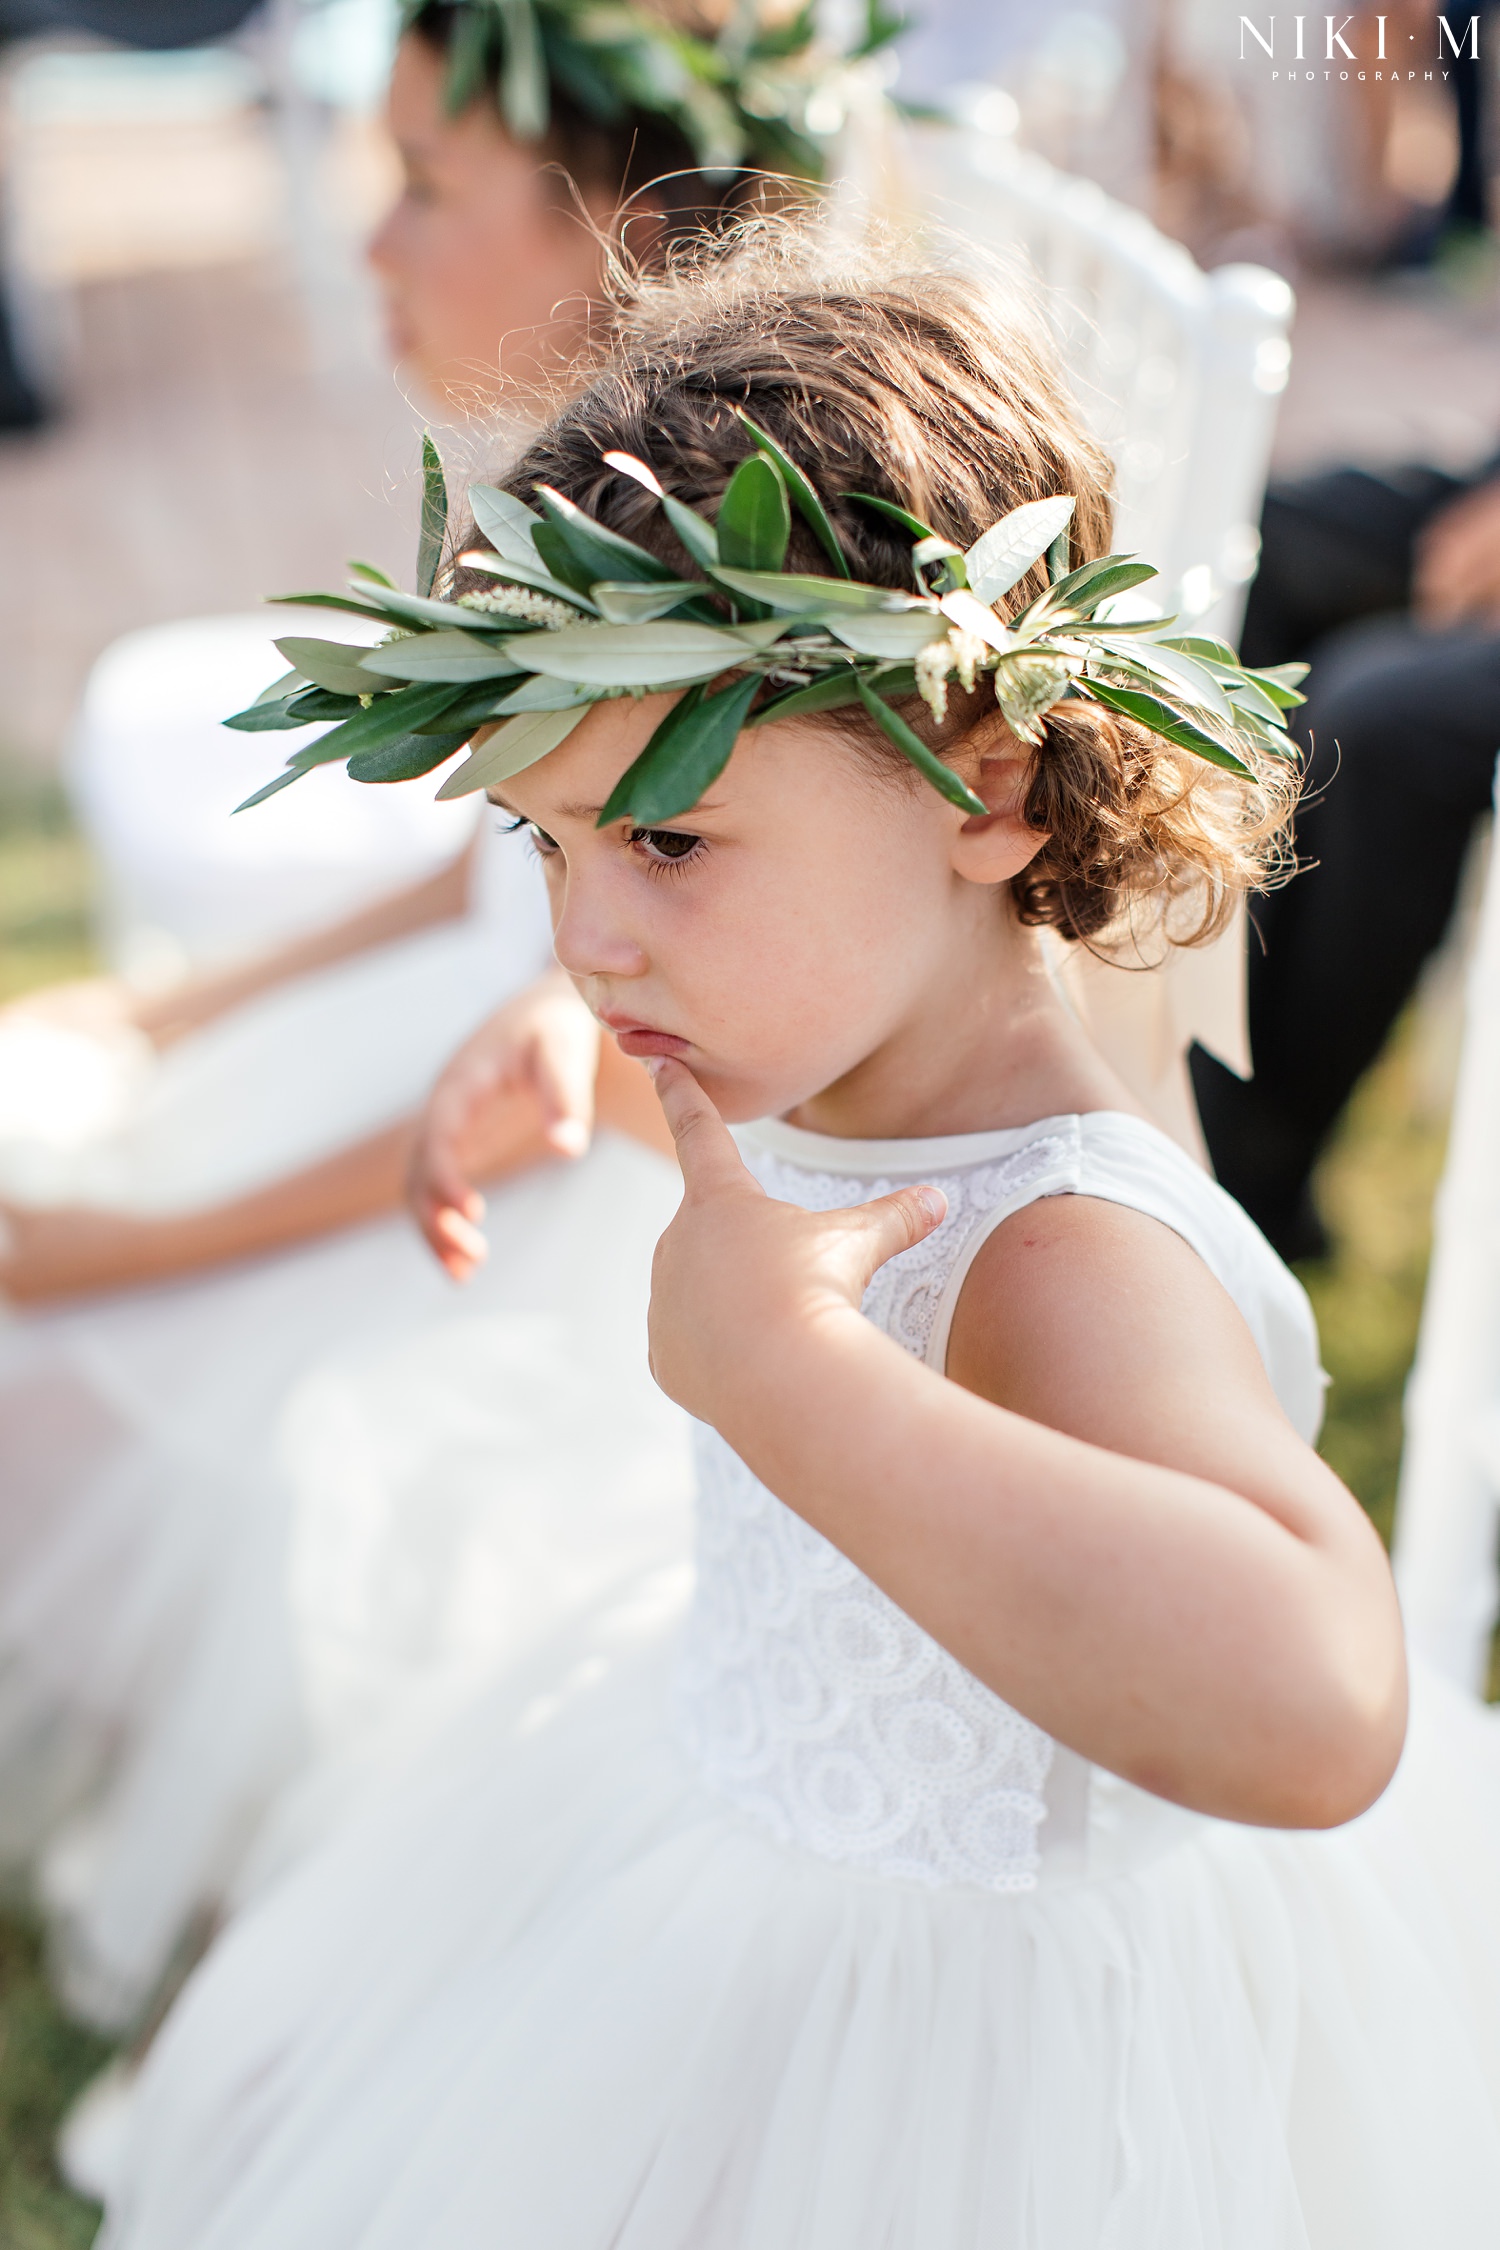 Olive branch crown for a flower girl